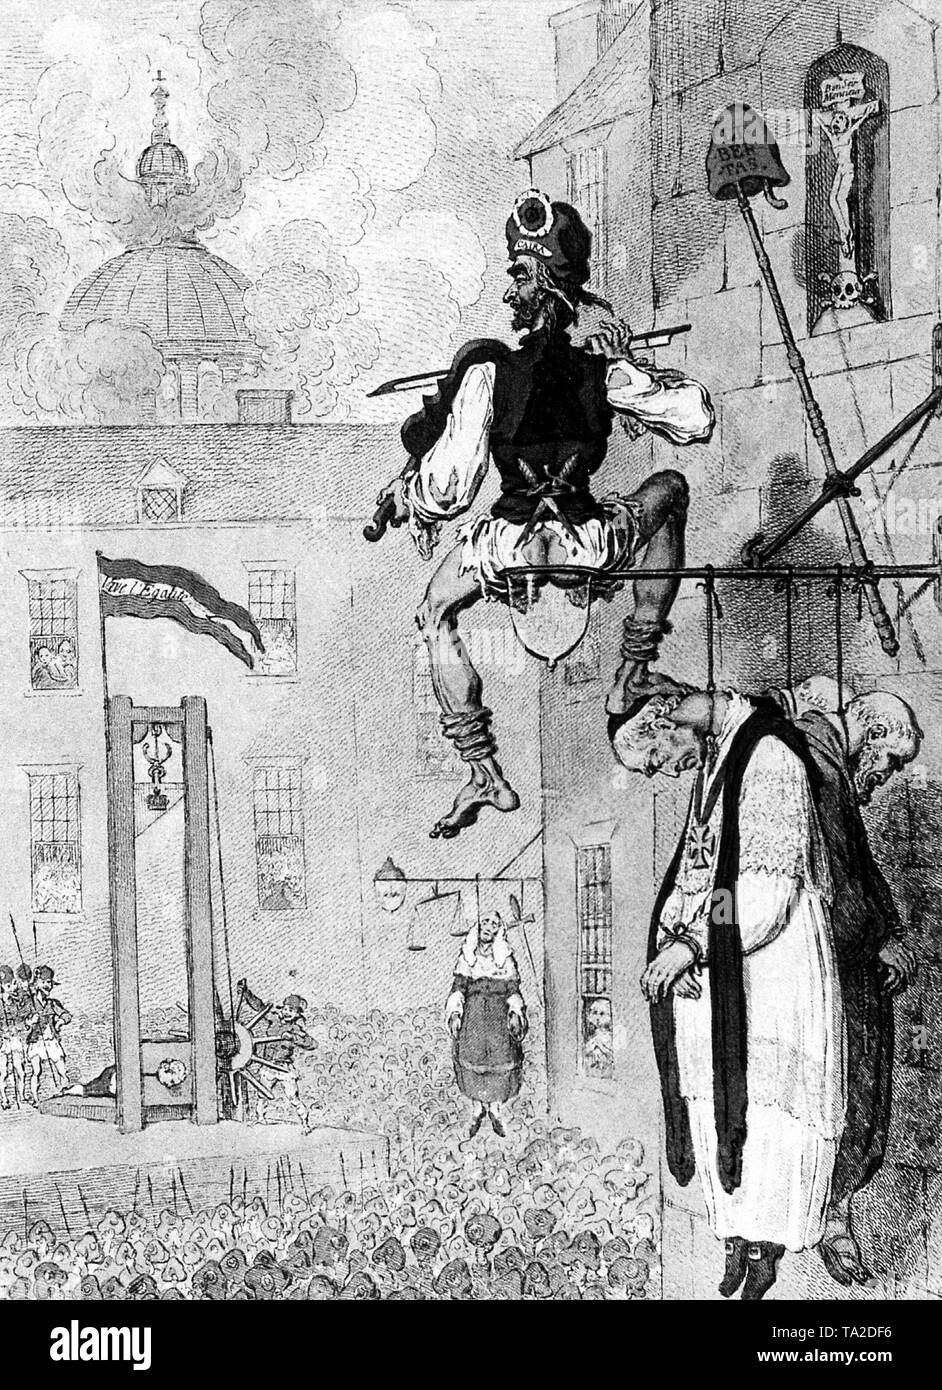 Illustration of the English caricaturist James Gillray on the French Revolution in 1793. In the foreground there is a Republican (sans-culotte), who plays the violin at the execution of the priests. In the background, a hanged judge between a sword and scales. At left, the scene of an execution by guillotine. Stock Photo